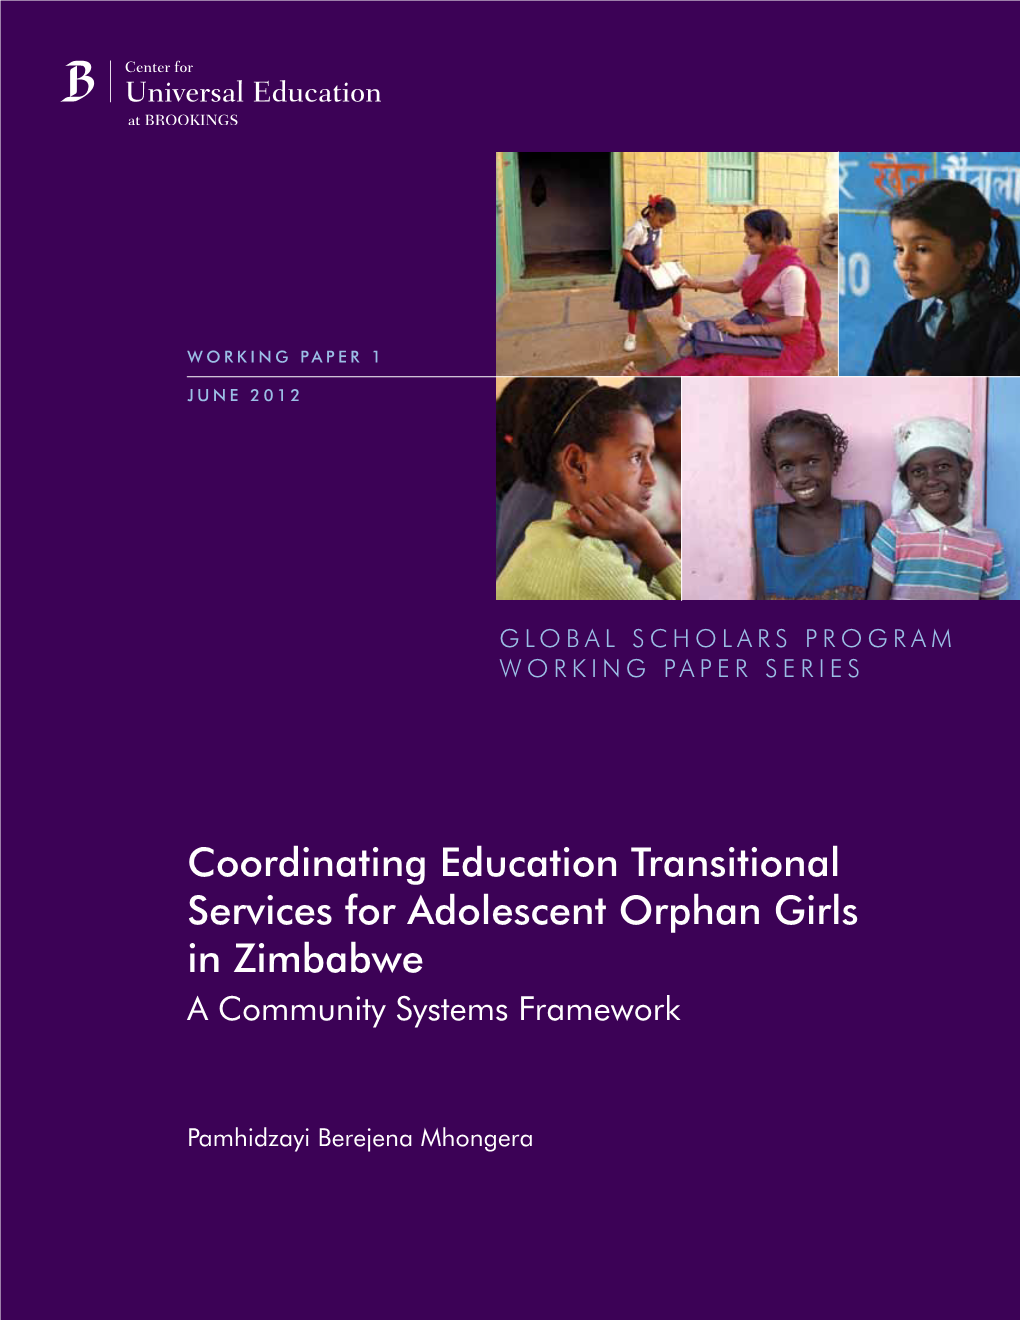 Coordinating Education Transitional Services for Adolescent Orphan Girls in Zimbabwe a Community Systems Framework